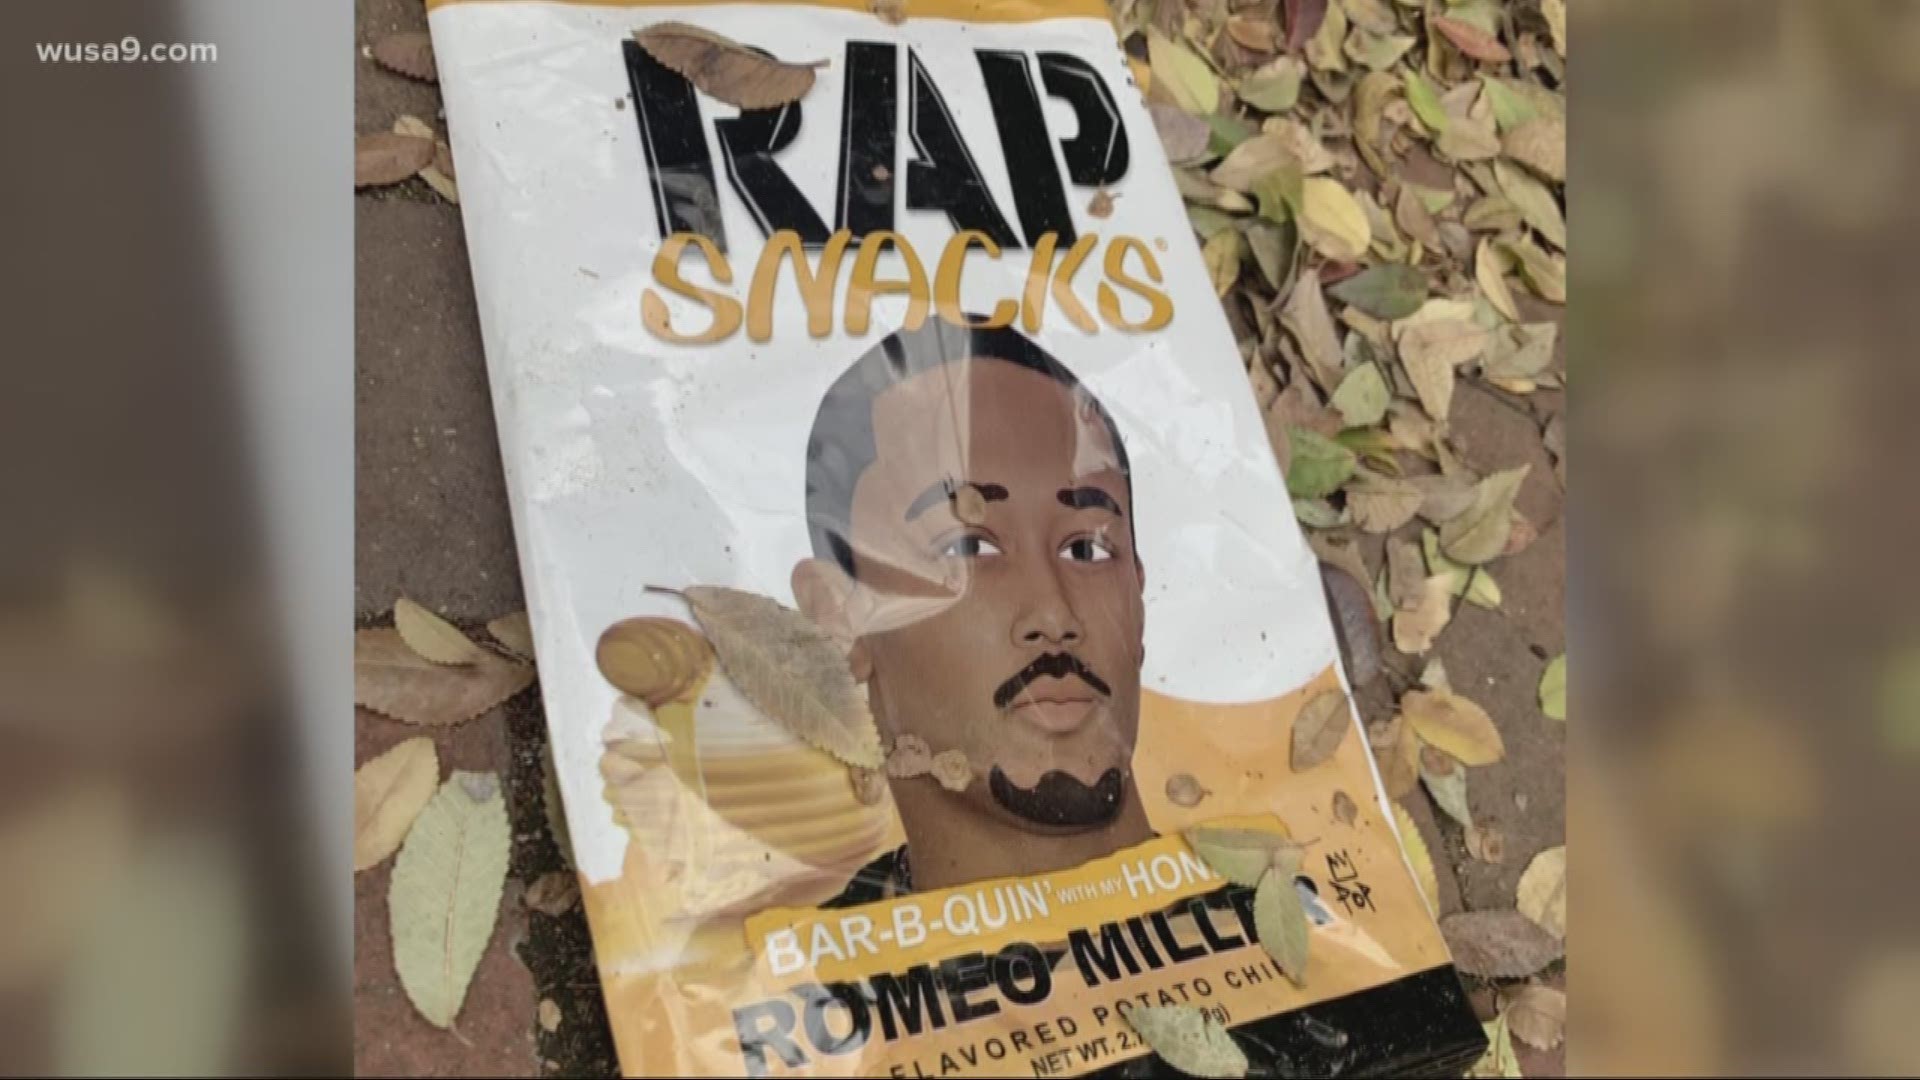 'Rap Snacks' should be the official chip of the city. What flavor 'Rap Snacks' do you think would be the chip of the District?